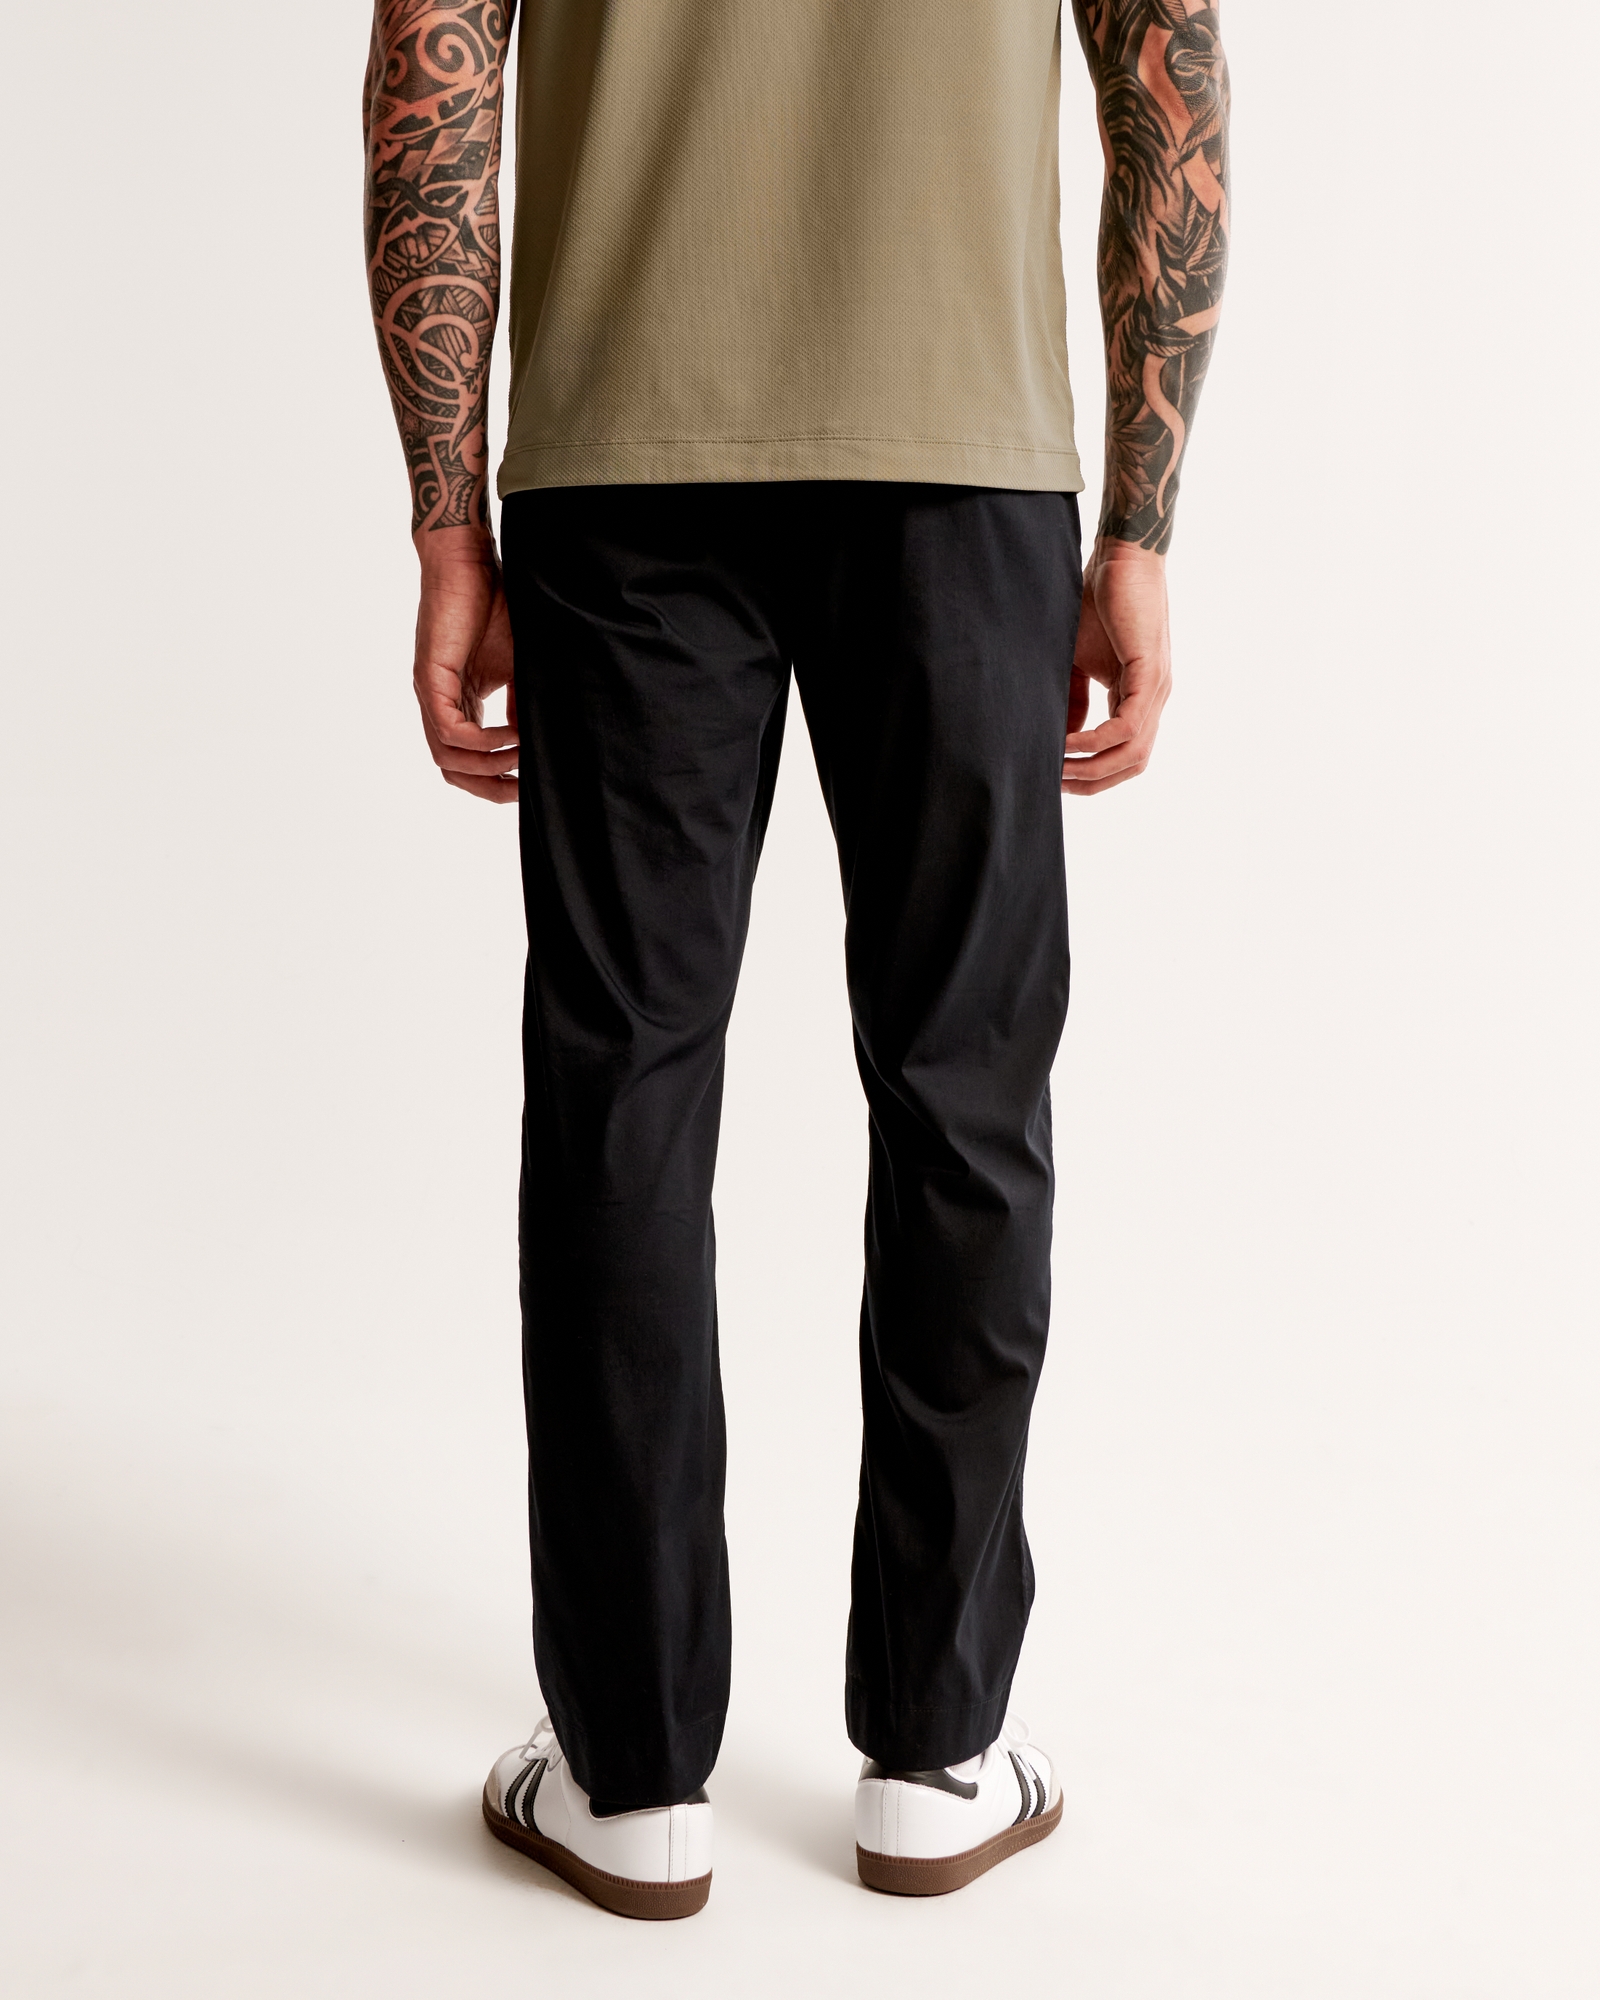 A&F All-Day Pant